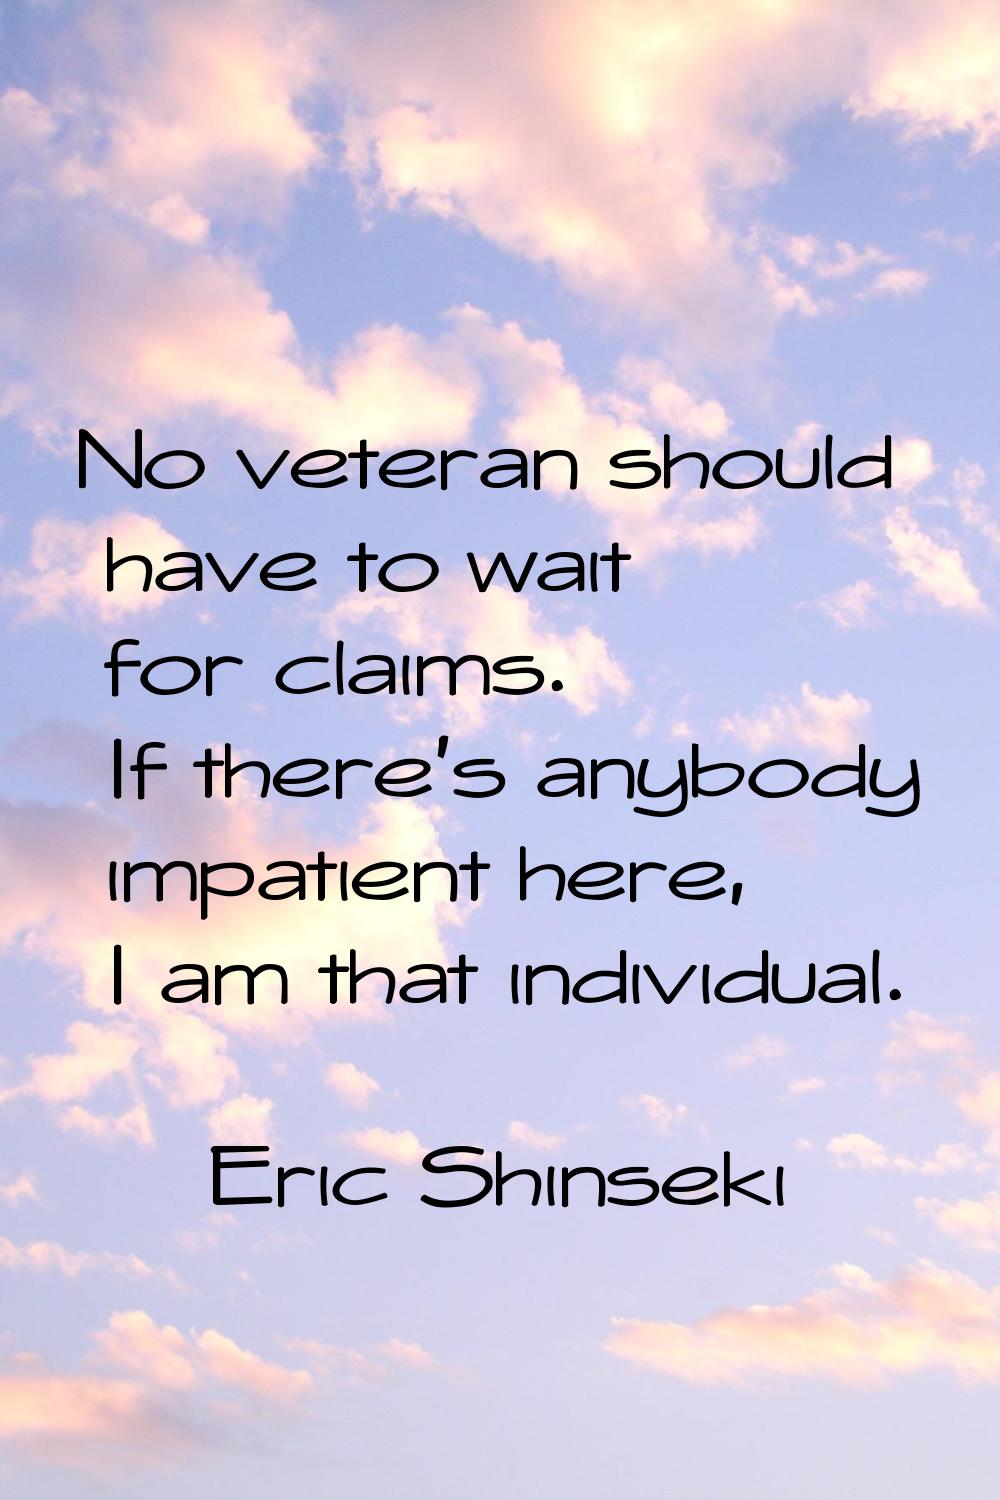 No veteran should have to wait for claims. If there's anybody impatient here, I am that individual.